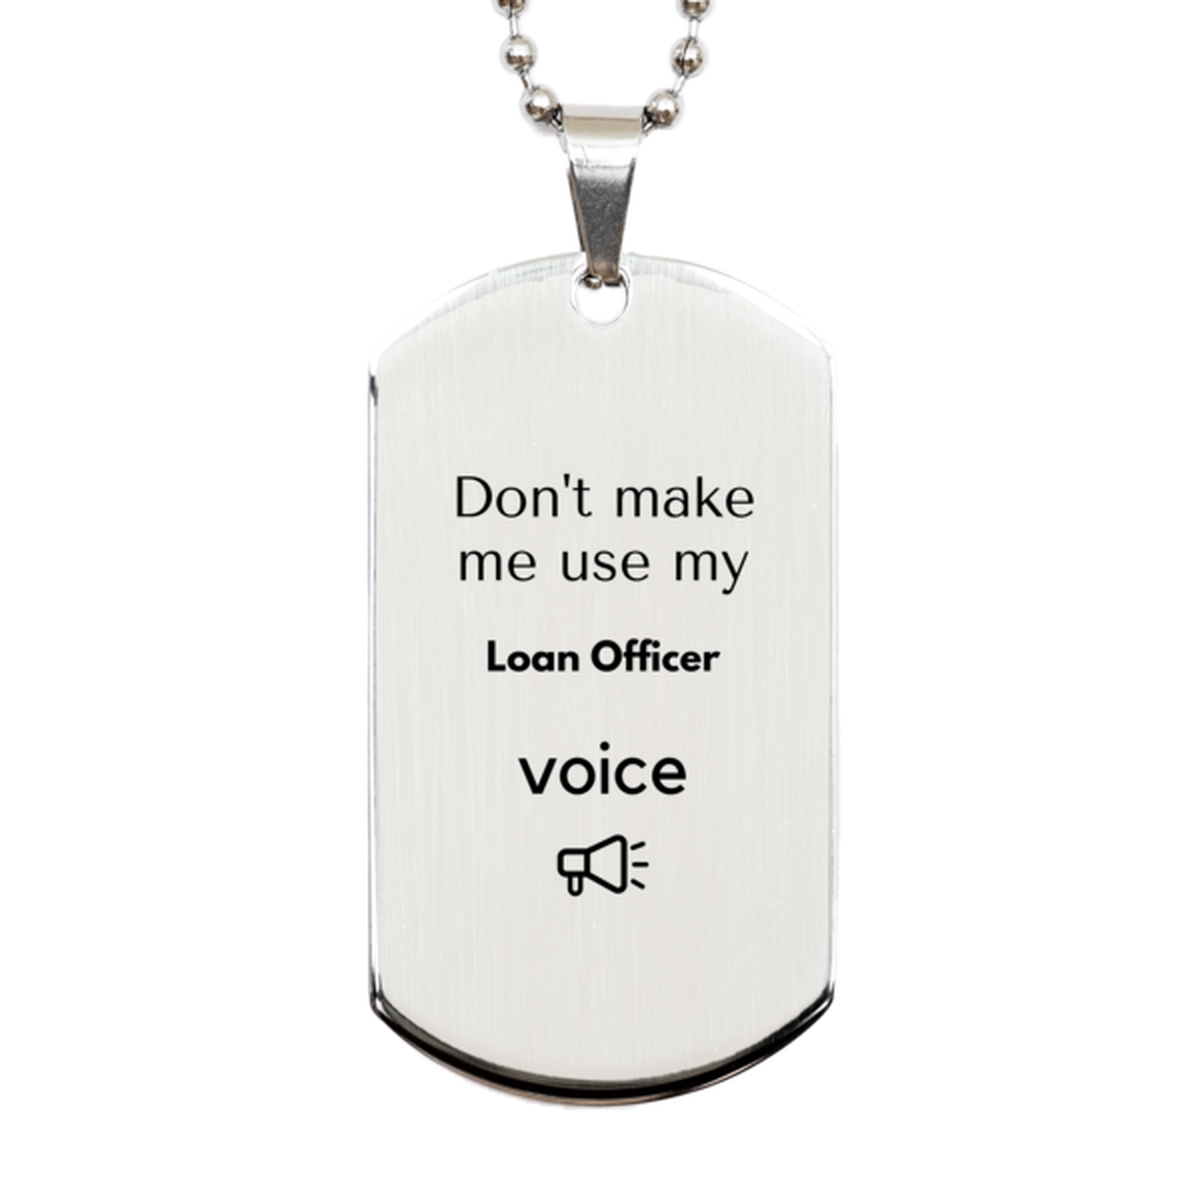 Don't make me use my Loan Officer voice, Sarcasm Loan Officer Gifts, Christmas Loan Officer Silver Dog Tag Birthday Unique Gifts For Loan Officer Coworkers, Men, Women, Colleague, Friends